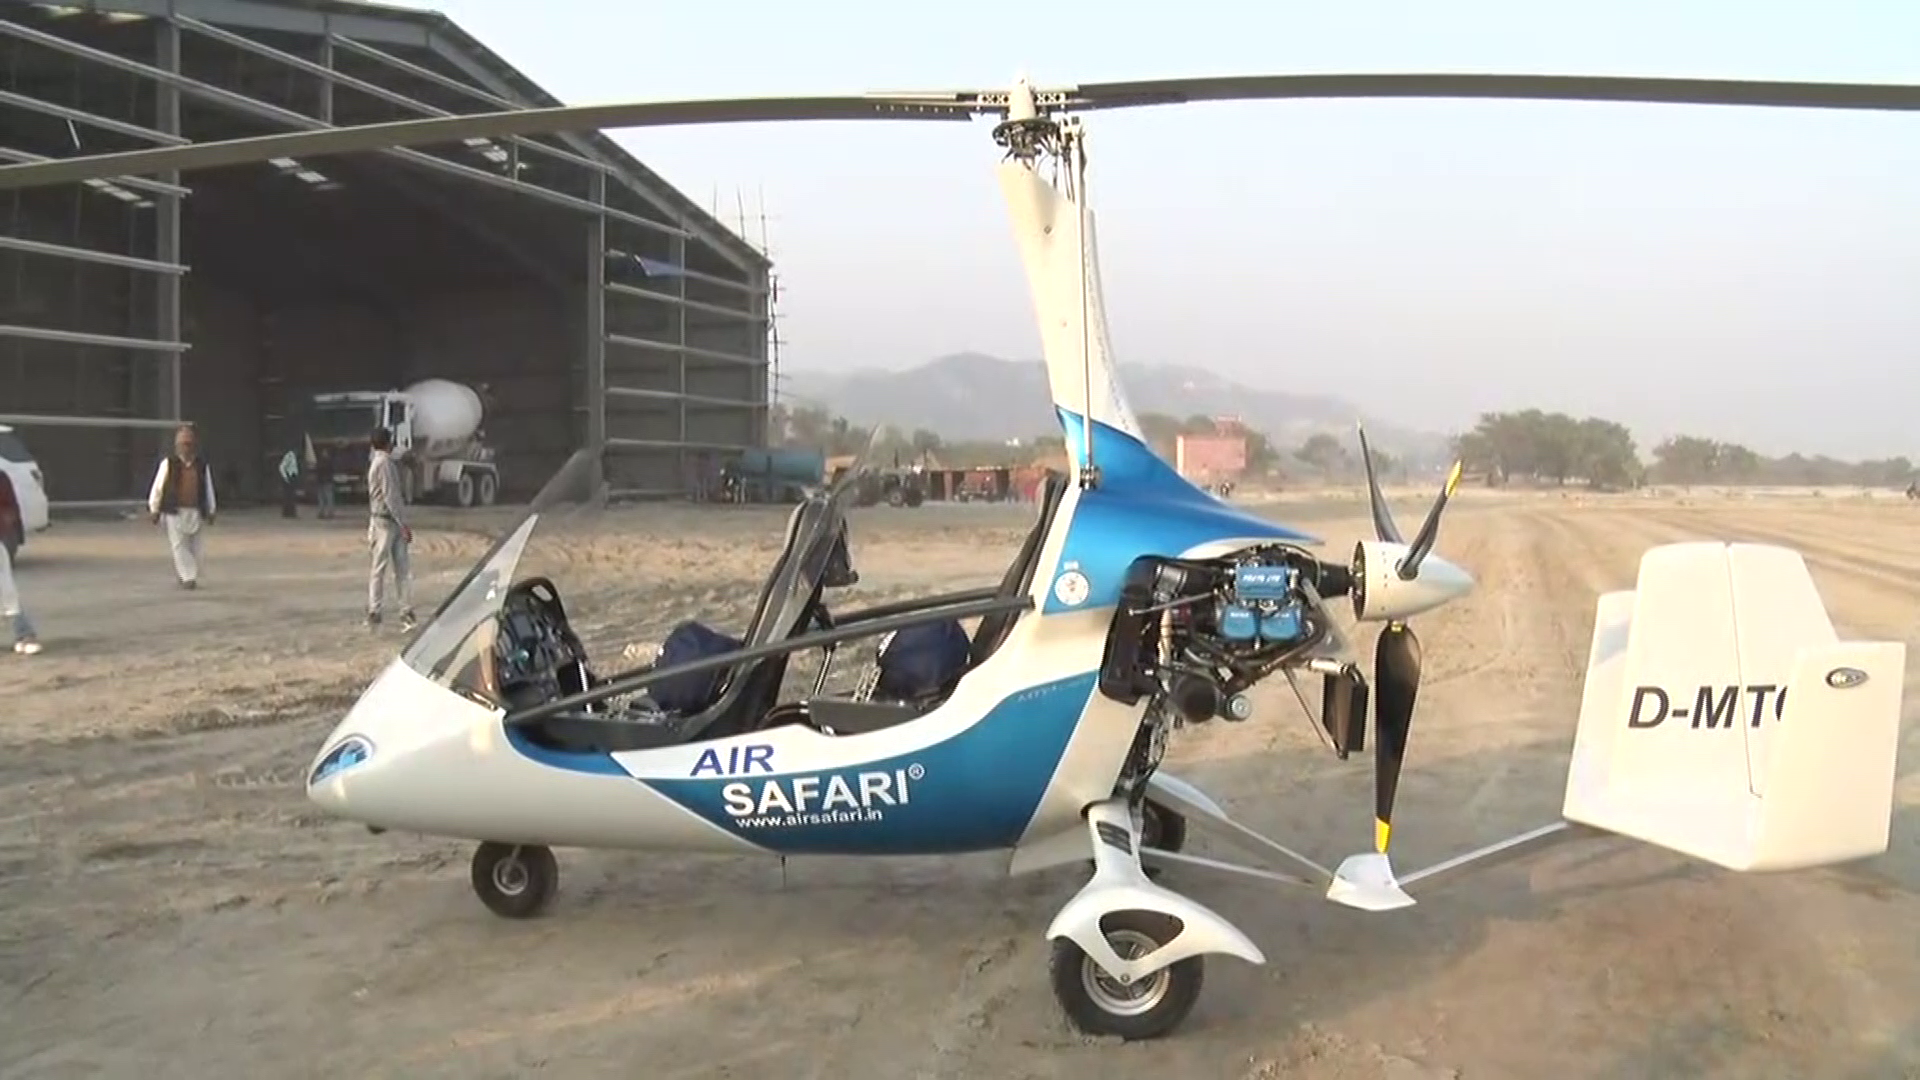 interview of Manish Saini MD of Gyrocopter